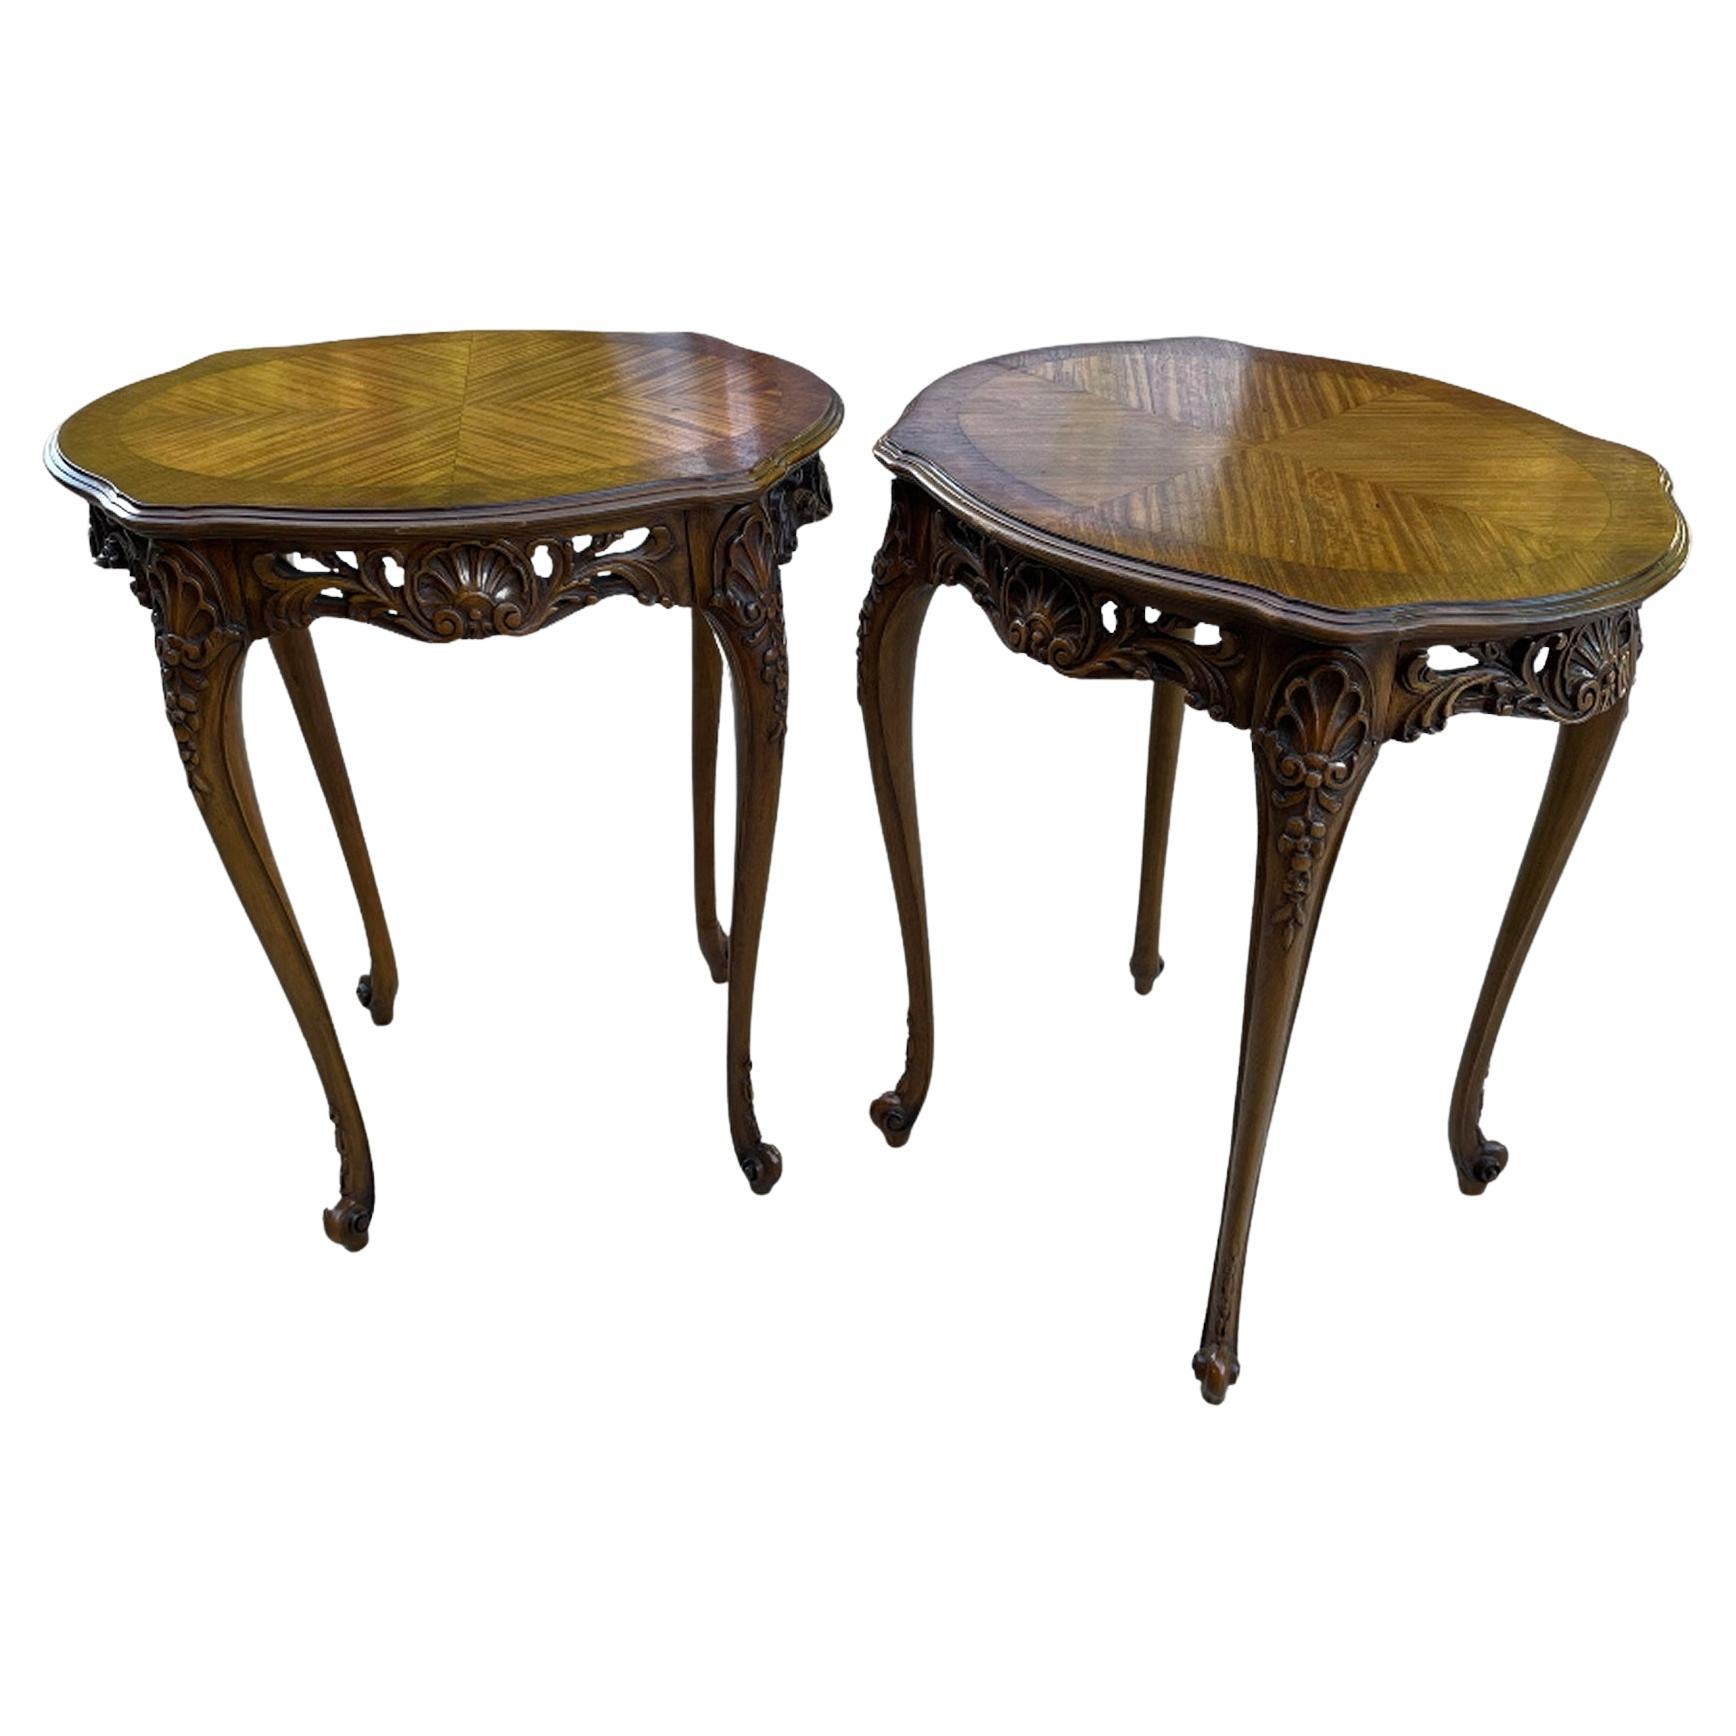 Lovely Pair of Pecan Wood Bedside/Side Tables